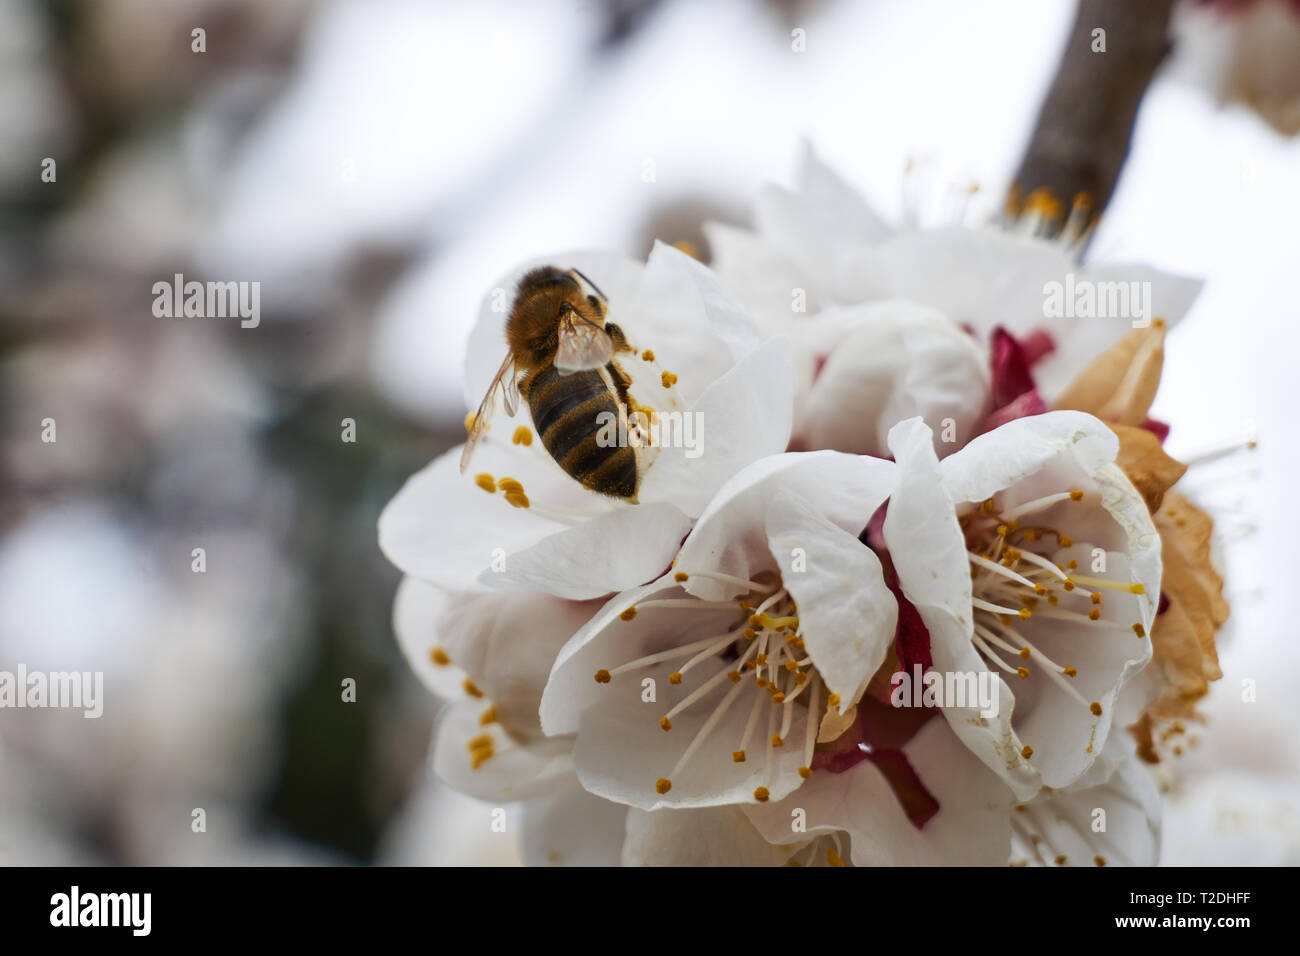 Close up view of a honey bee (Apis mellifera) on apple blossoms (Malus pumila) on a spring day in Orem, Utah, USA Stock Photo